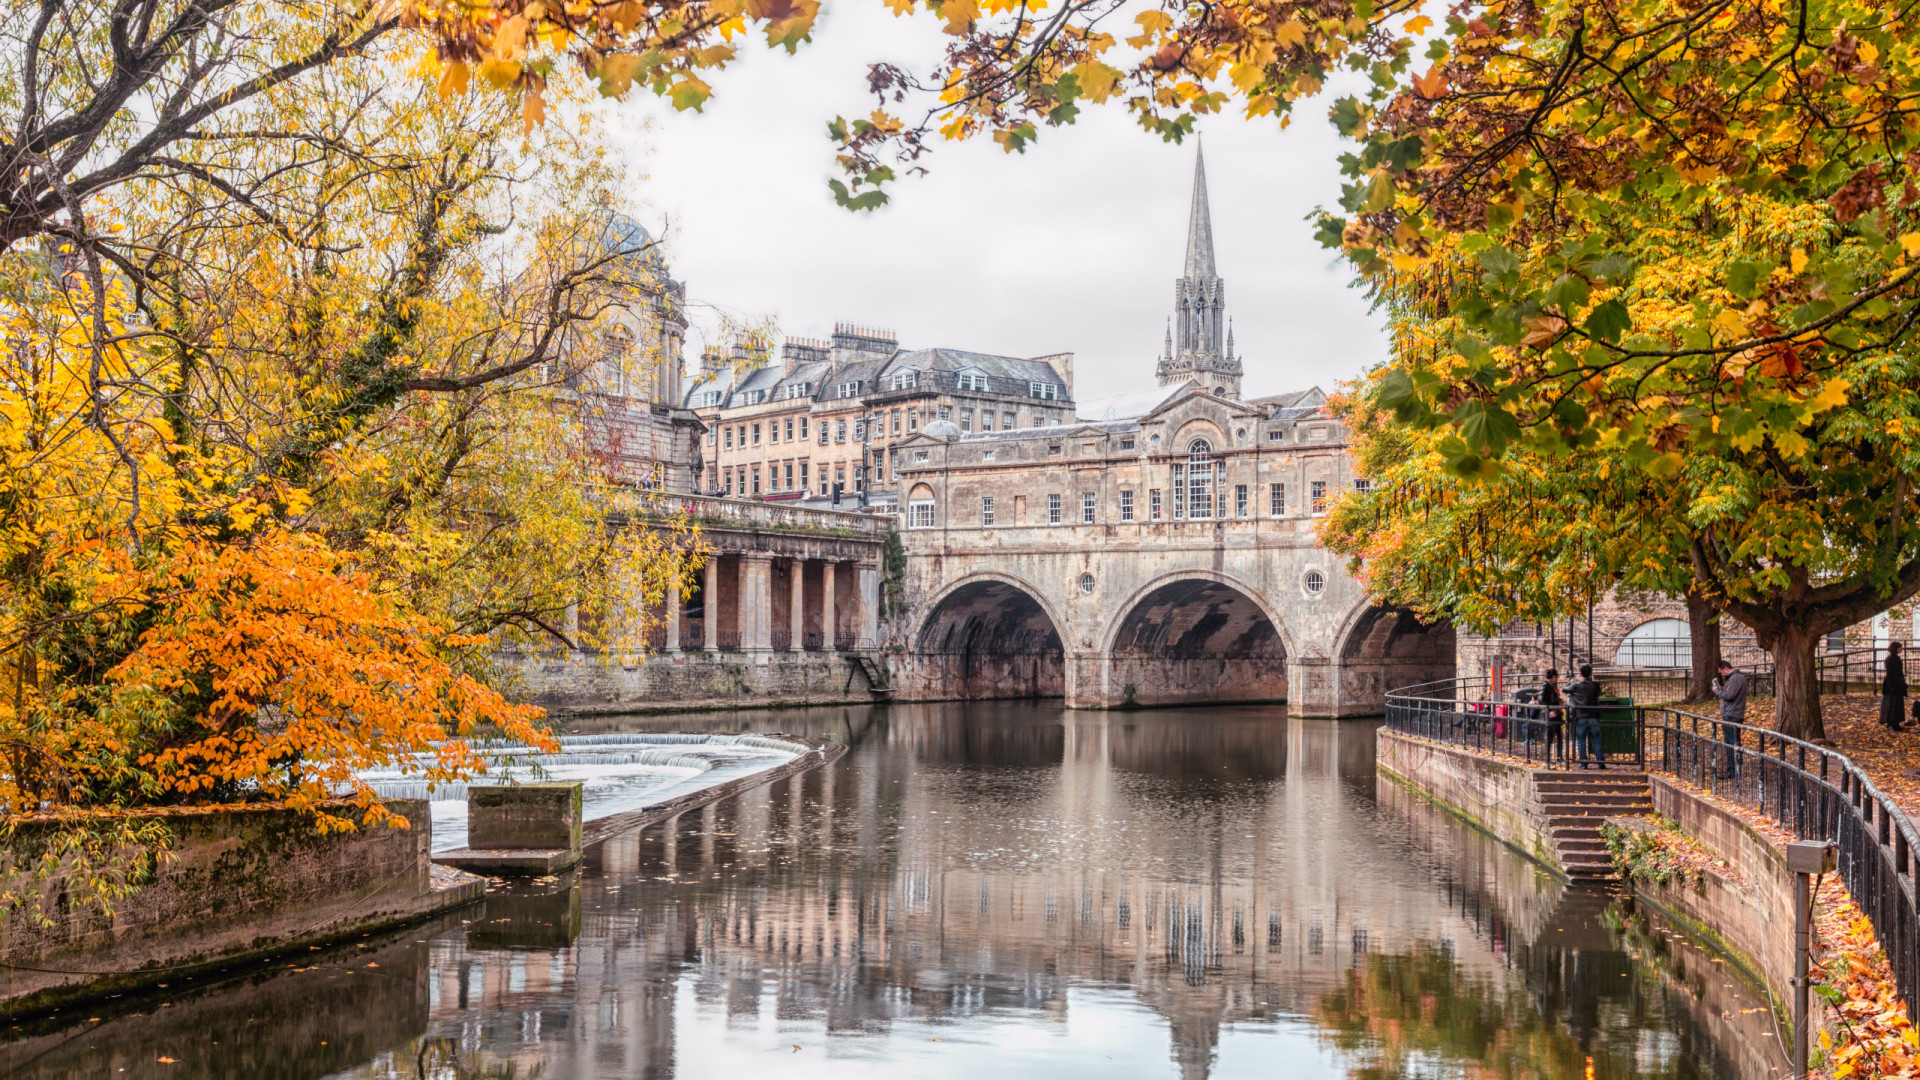 <p>Many of Jane Austen's novels, particularly 'Persuasion,' showcase the elegance of Bath. Strolling through the same streets as Anne Elliot and Captain Wentworth is a delightful experience for Austen fans.</p><p>You may also like:<a href="https://www.starsinsider.com/n/277940?utm_source=msn.com&utm_medium=display&utm_campaign=referral_description&utm_content=639745en-us"> The most extravagant celebrity purchases</a></p>